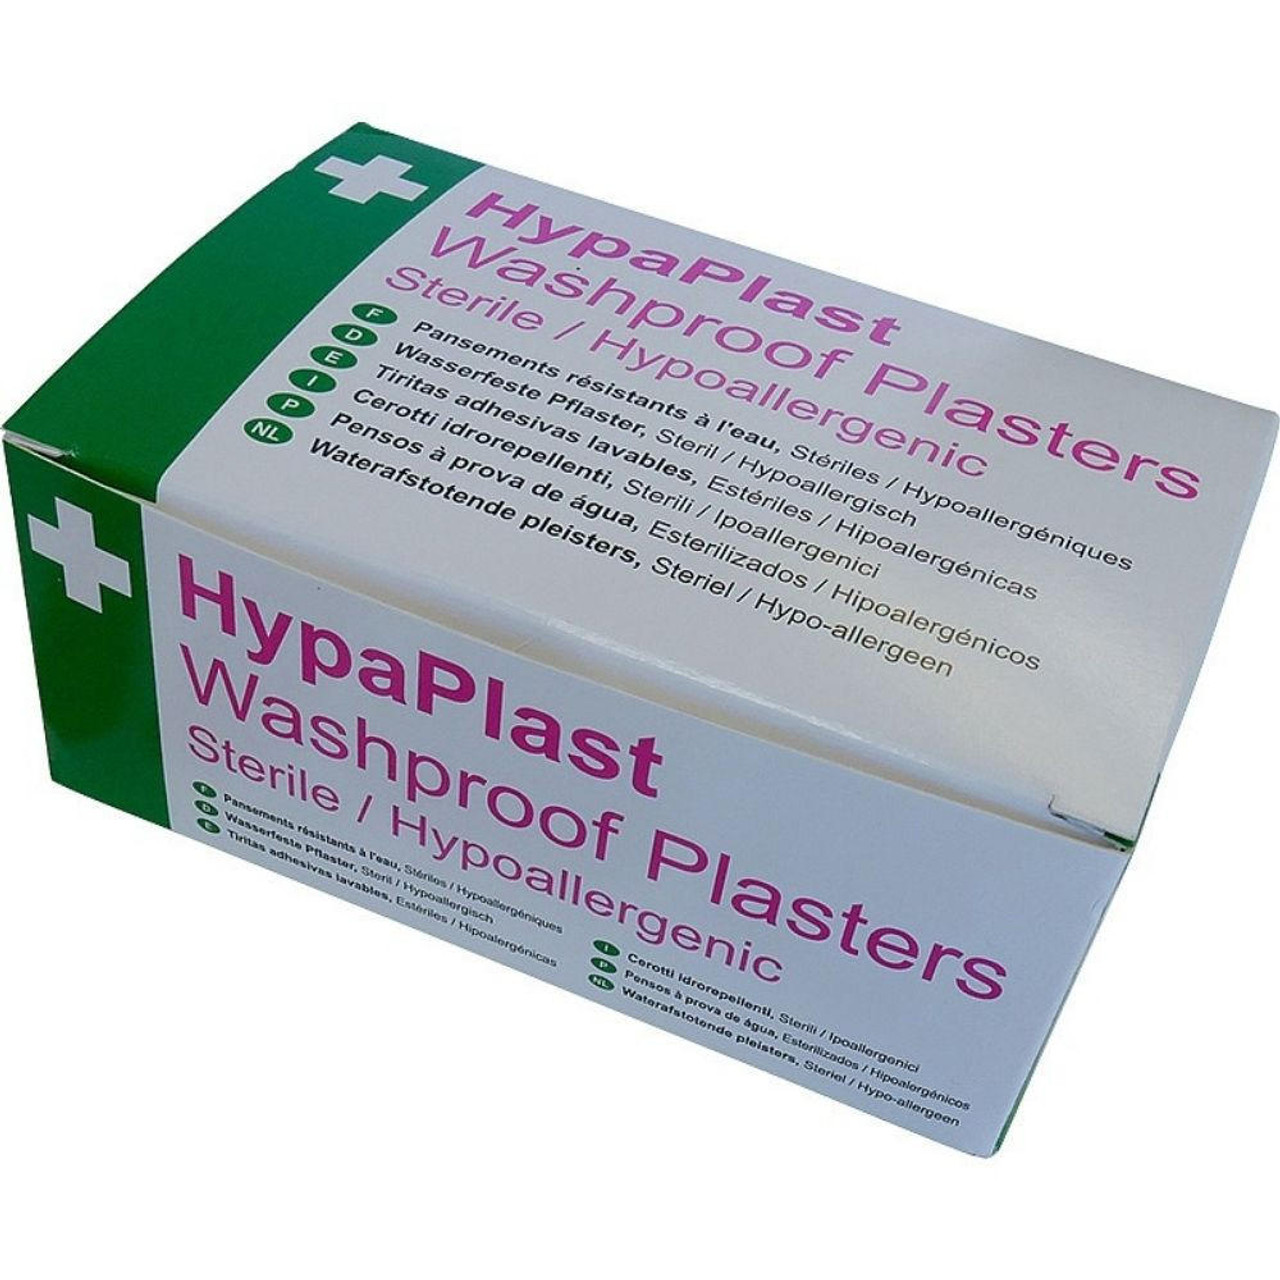 HypaPlast Washproof Plasters Pink 3.8 x 1.9cm Small Strip Box of 100 Hypoallergenic